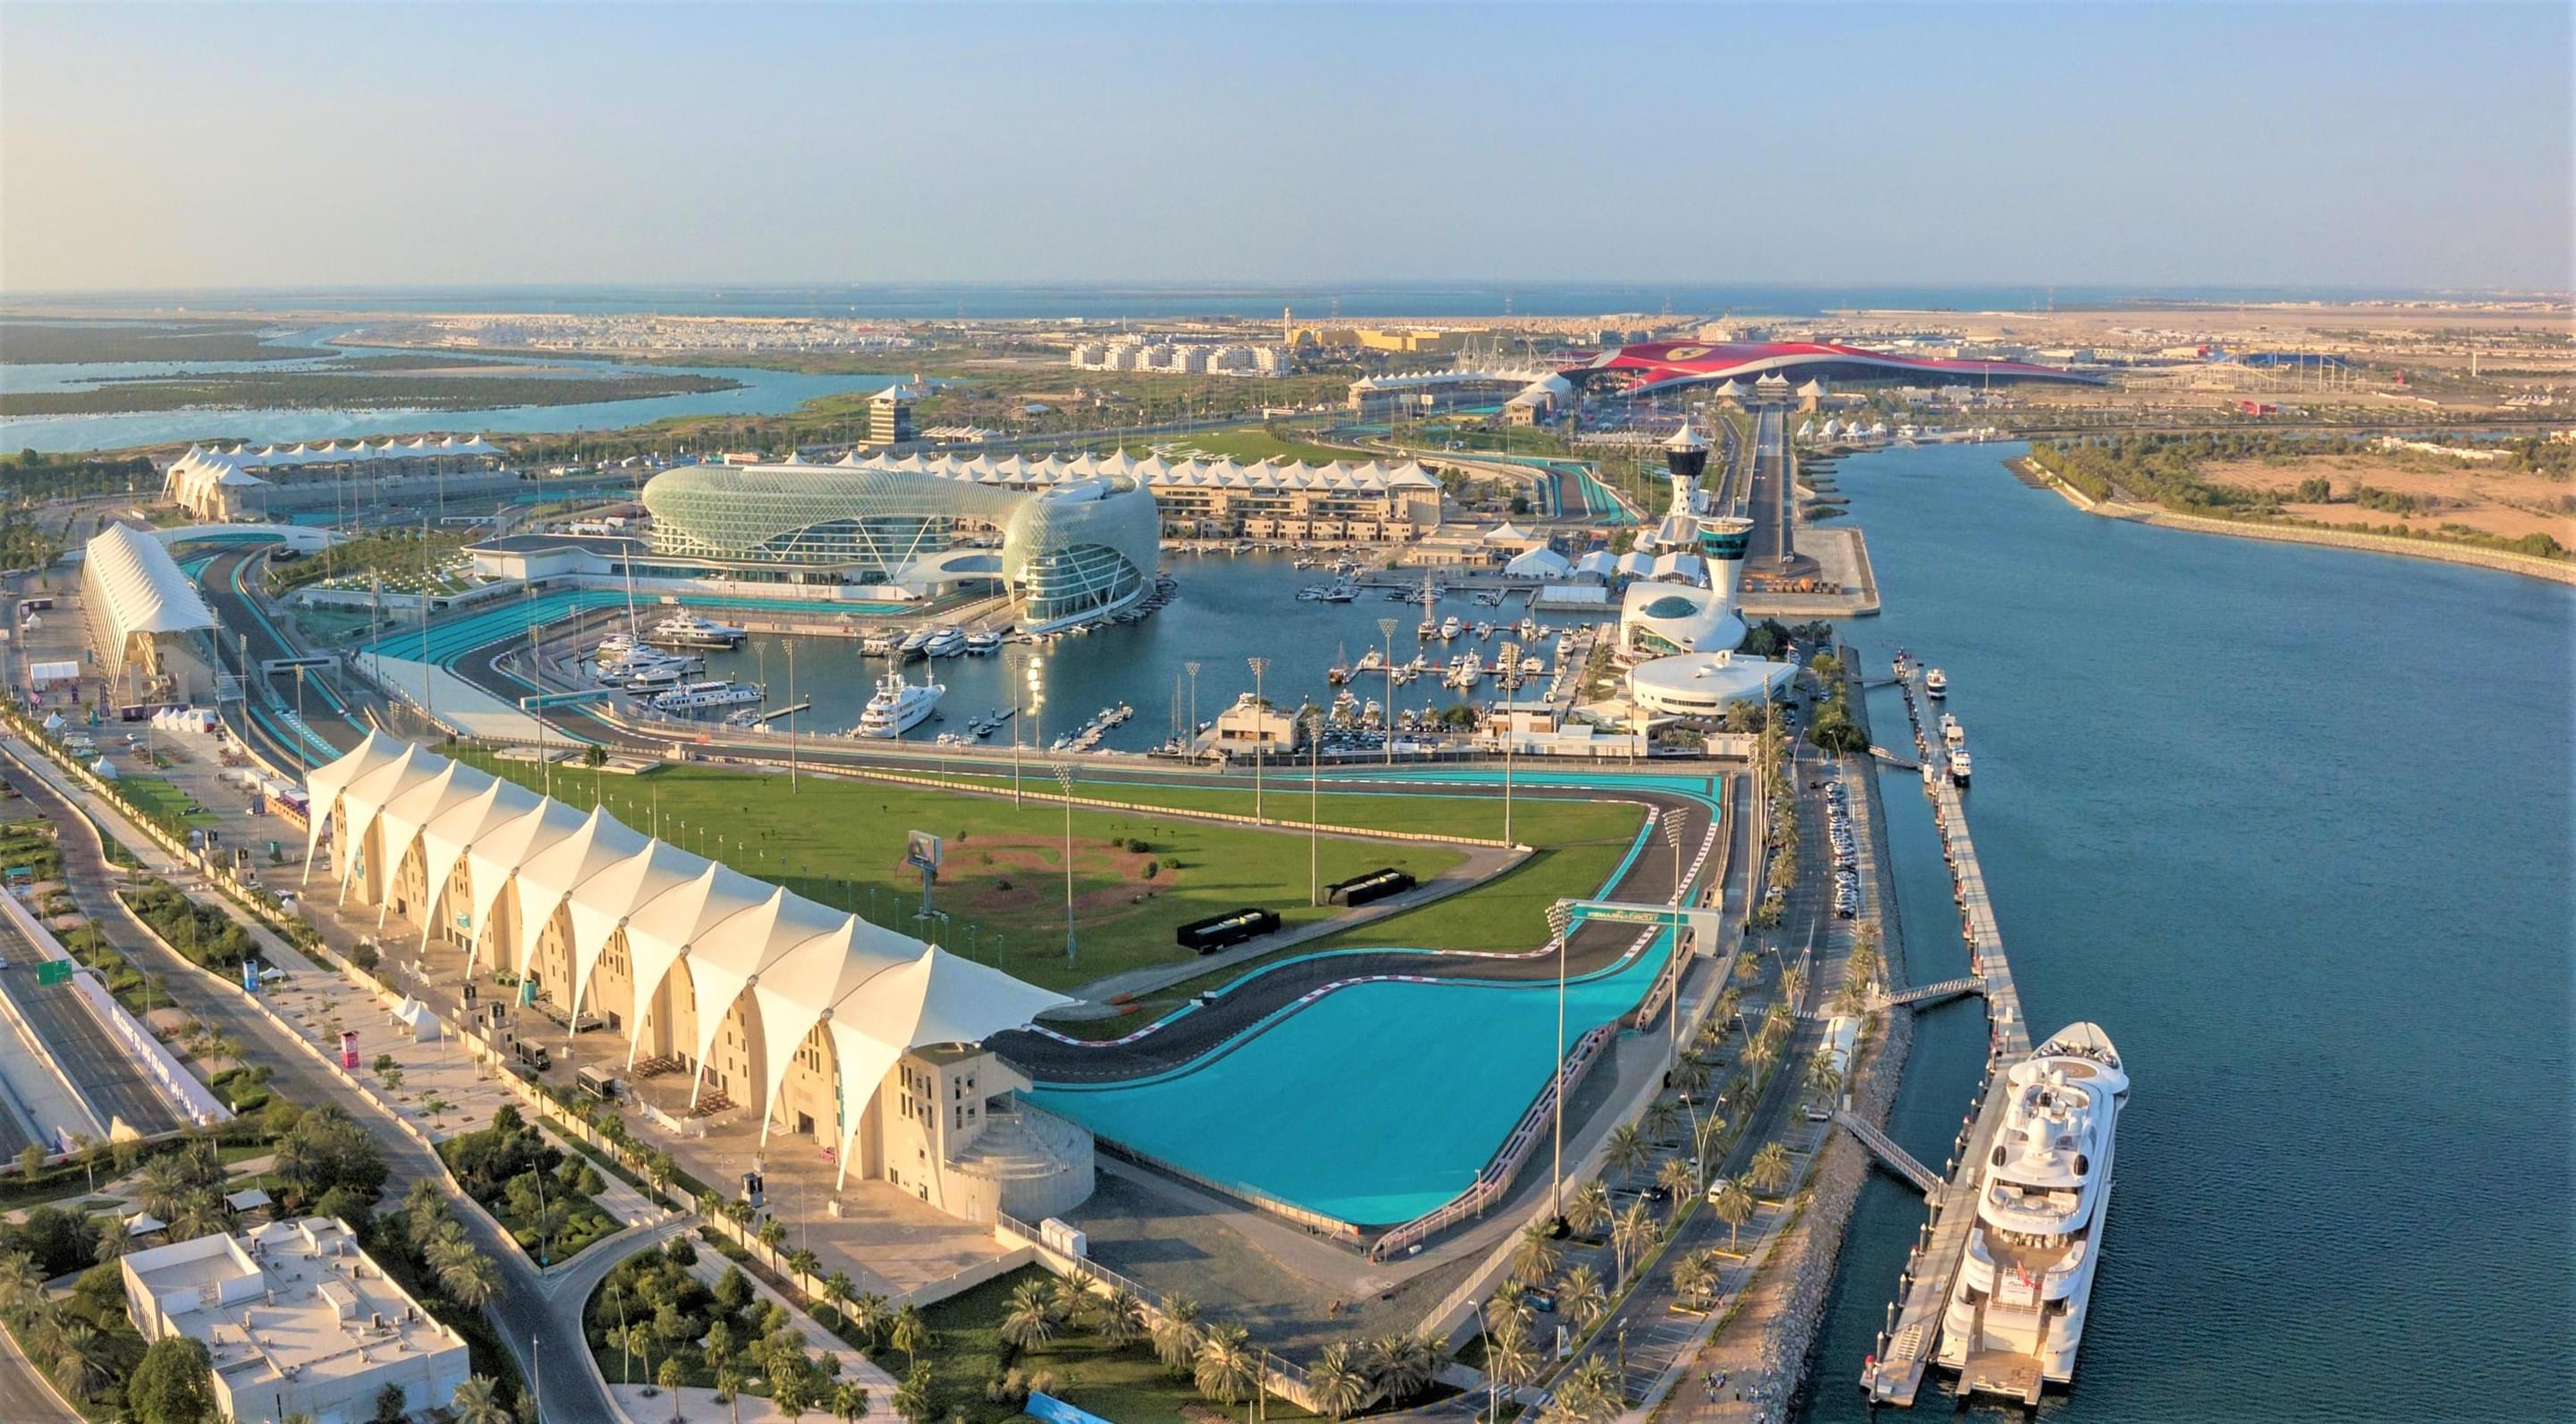 Activities to Do in Yas Island